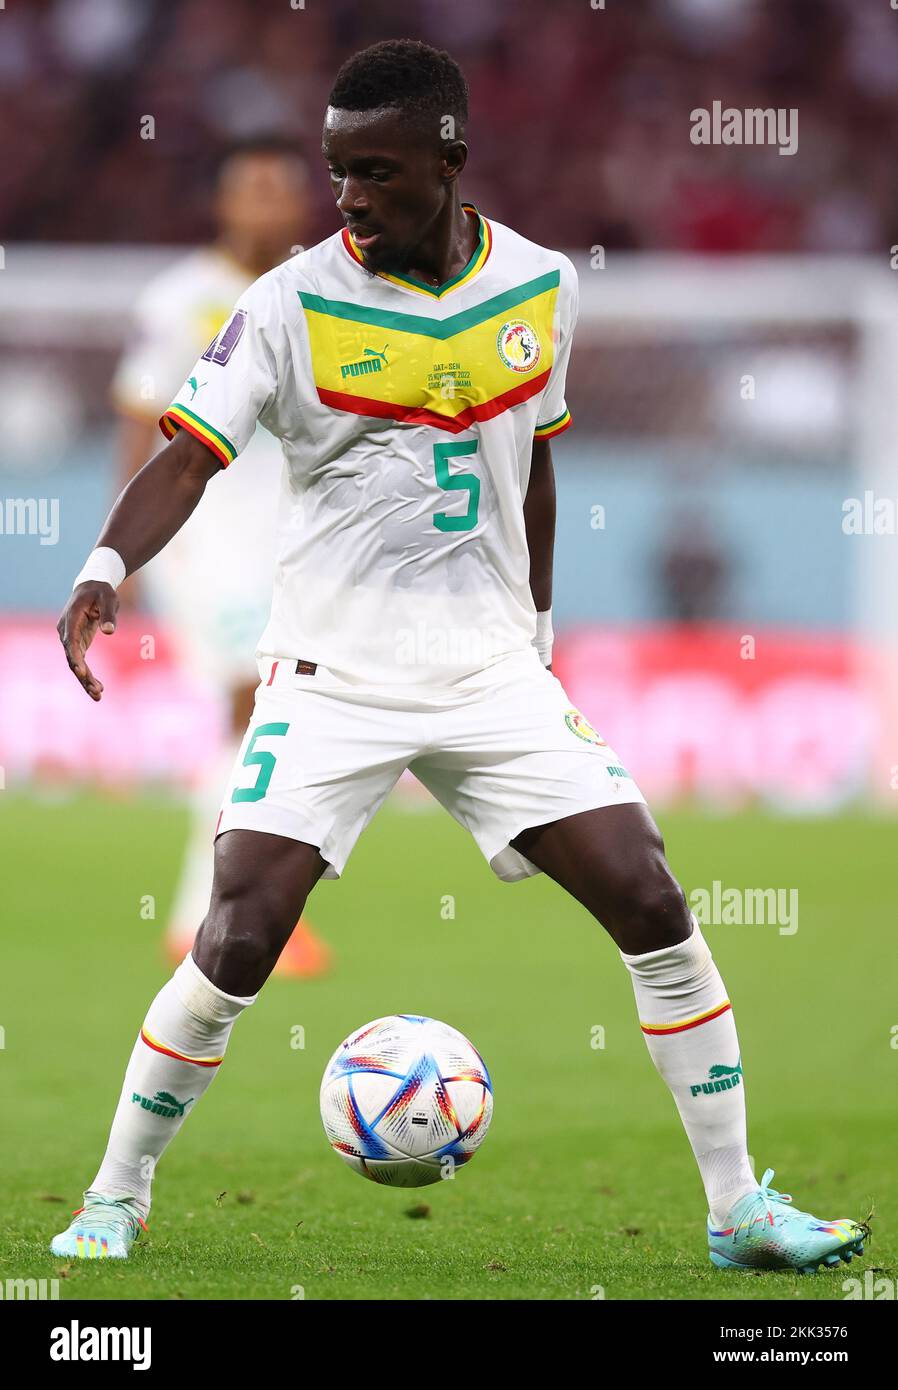 Doha, Qatar, 25th November 2022. Idrissa Gueye of Senegal  during the FIFA World Cup 2022 match at Al Thumama Stadium, Doha. Picture credit should read: David Klein / Sportimage Credit: Sportimage/Alamy Live News Credit: Sportimage/Alamy Live News Stock Photo